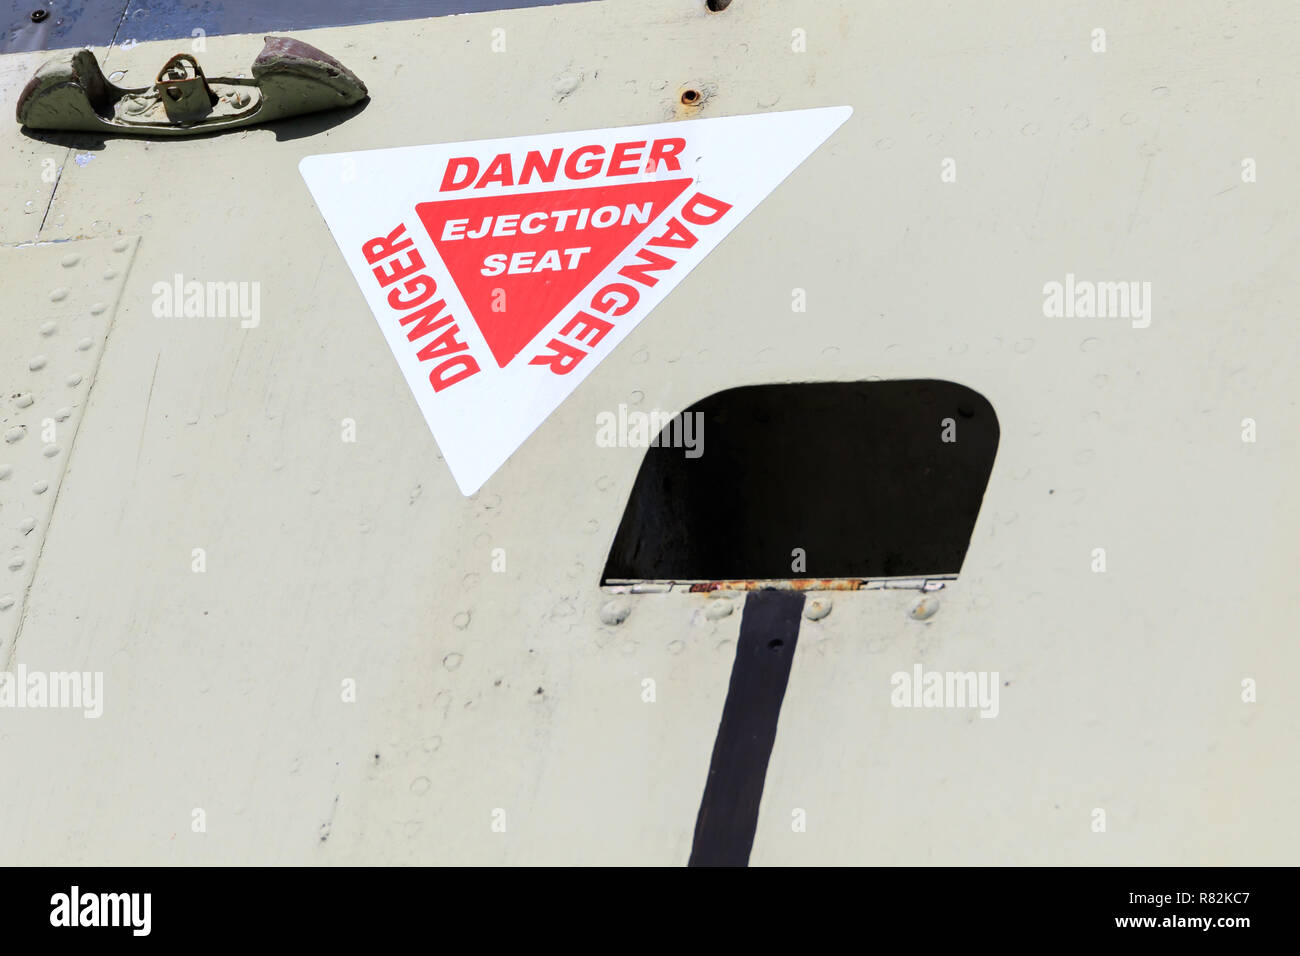 Danger Ejection Seat sign on an old jet plane Stock Photo